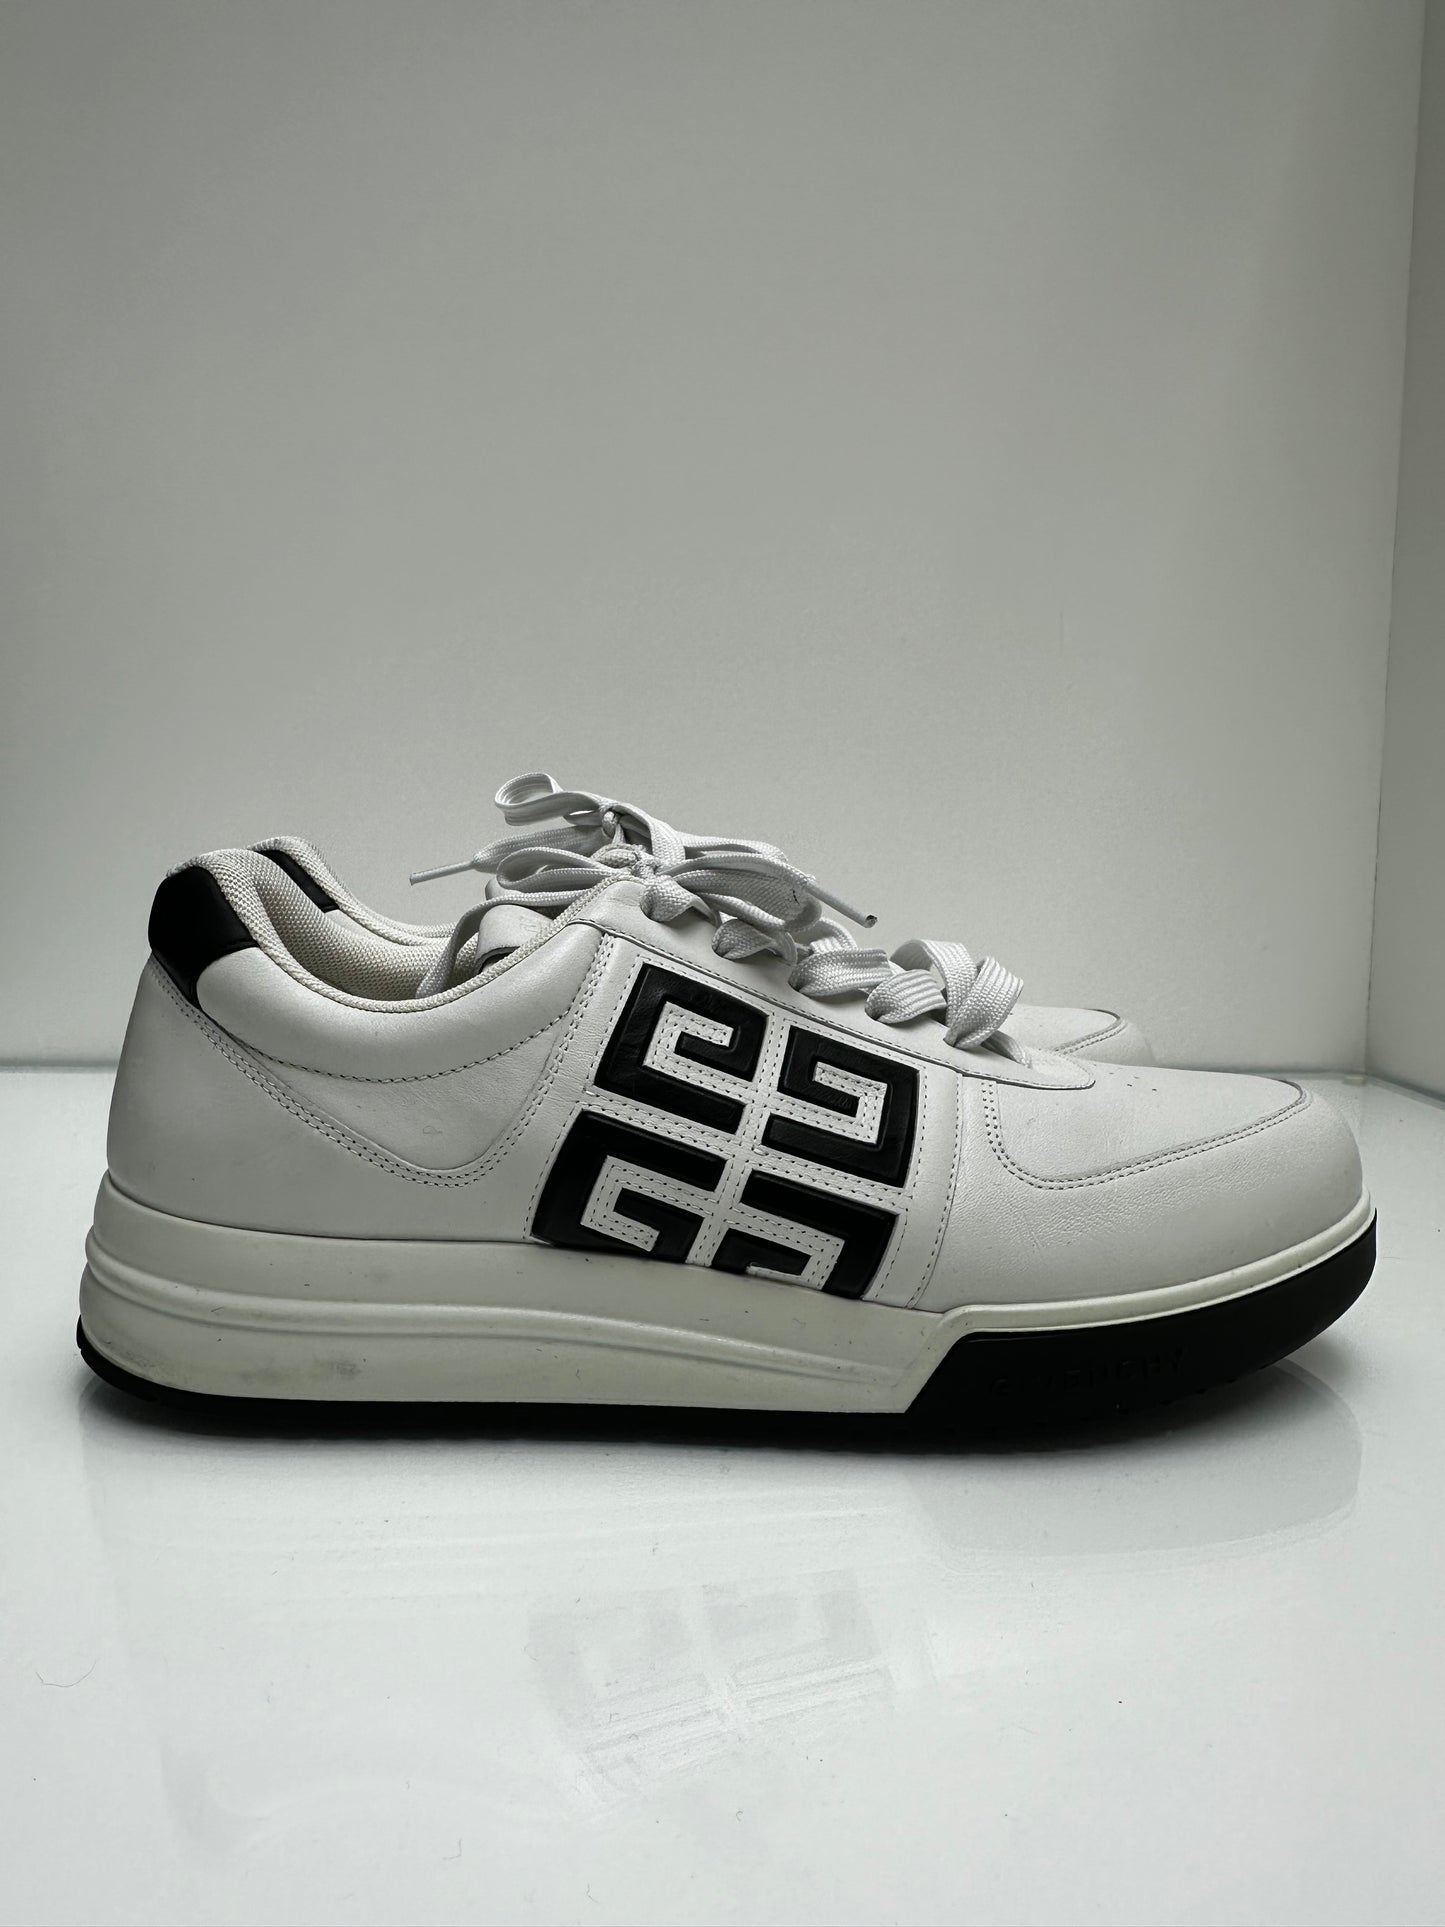 Givenchy White & Black Leather Sneakers, 45